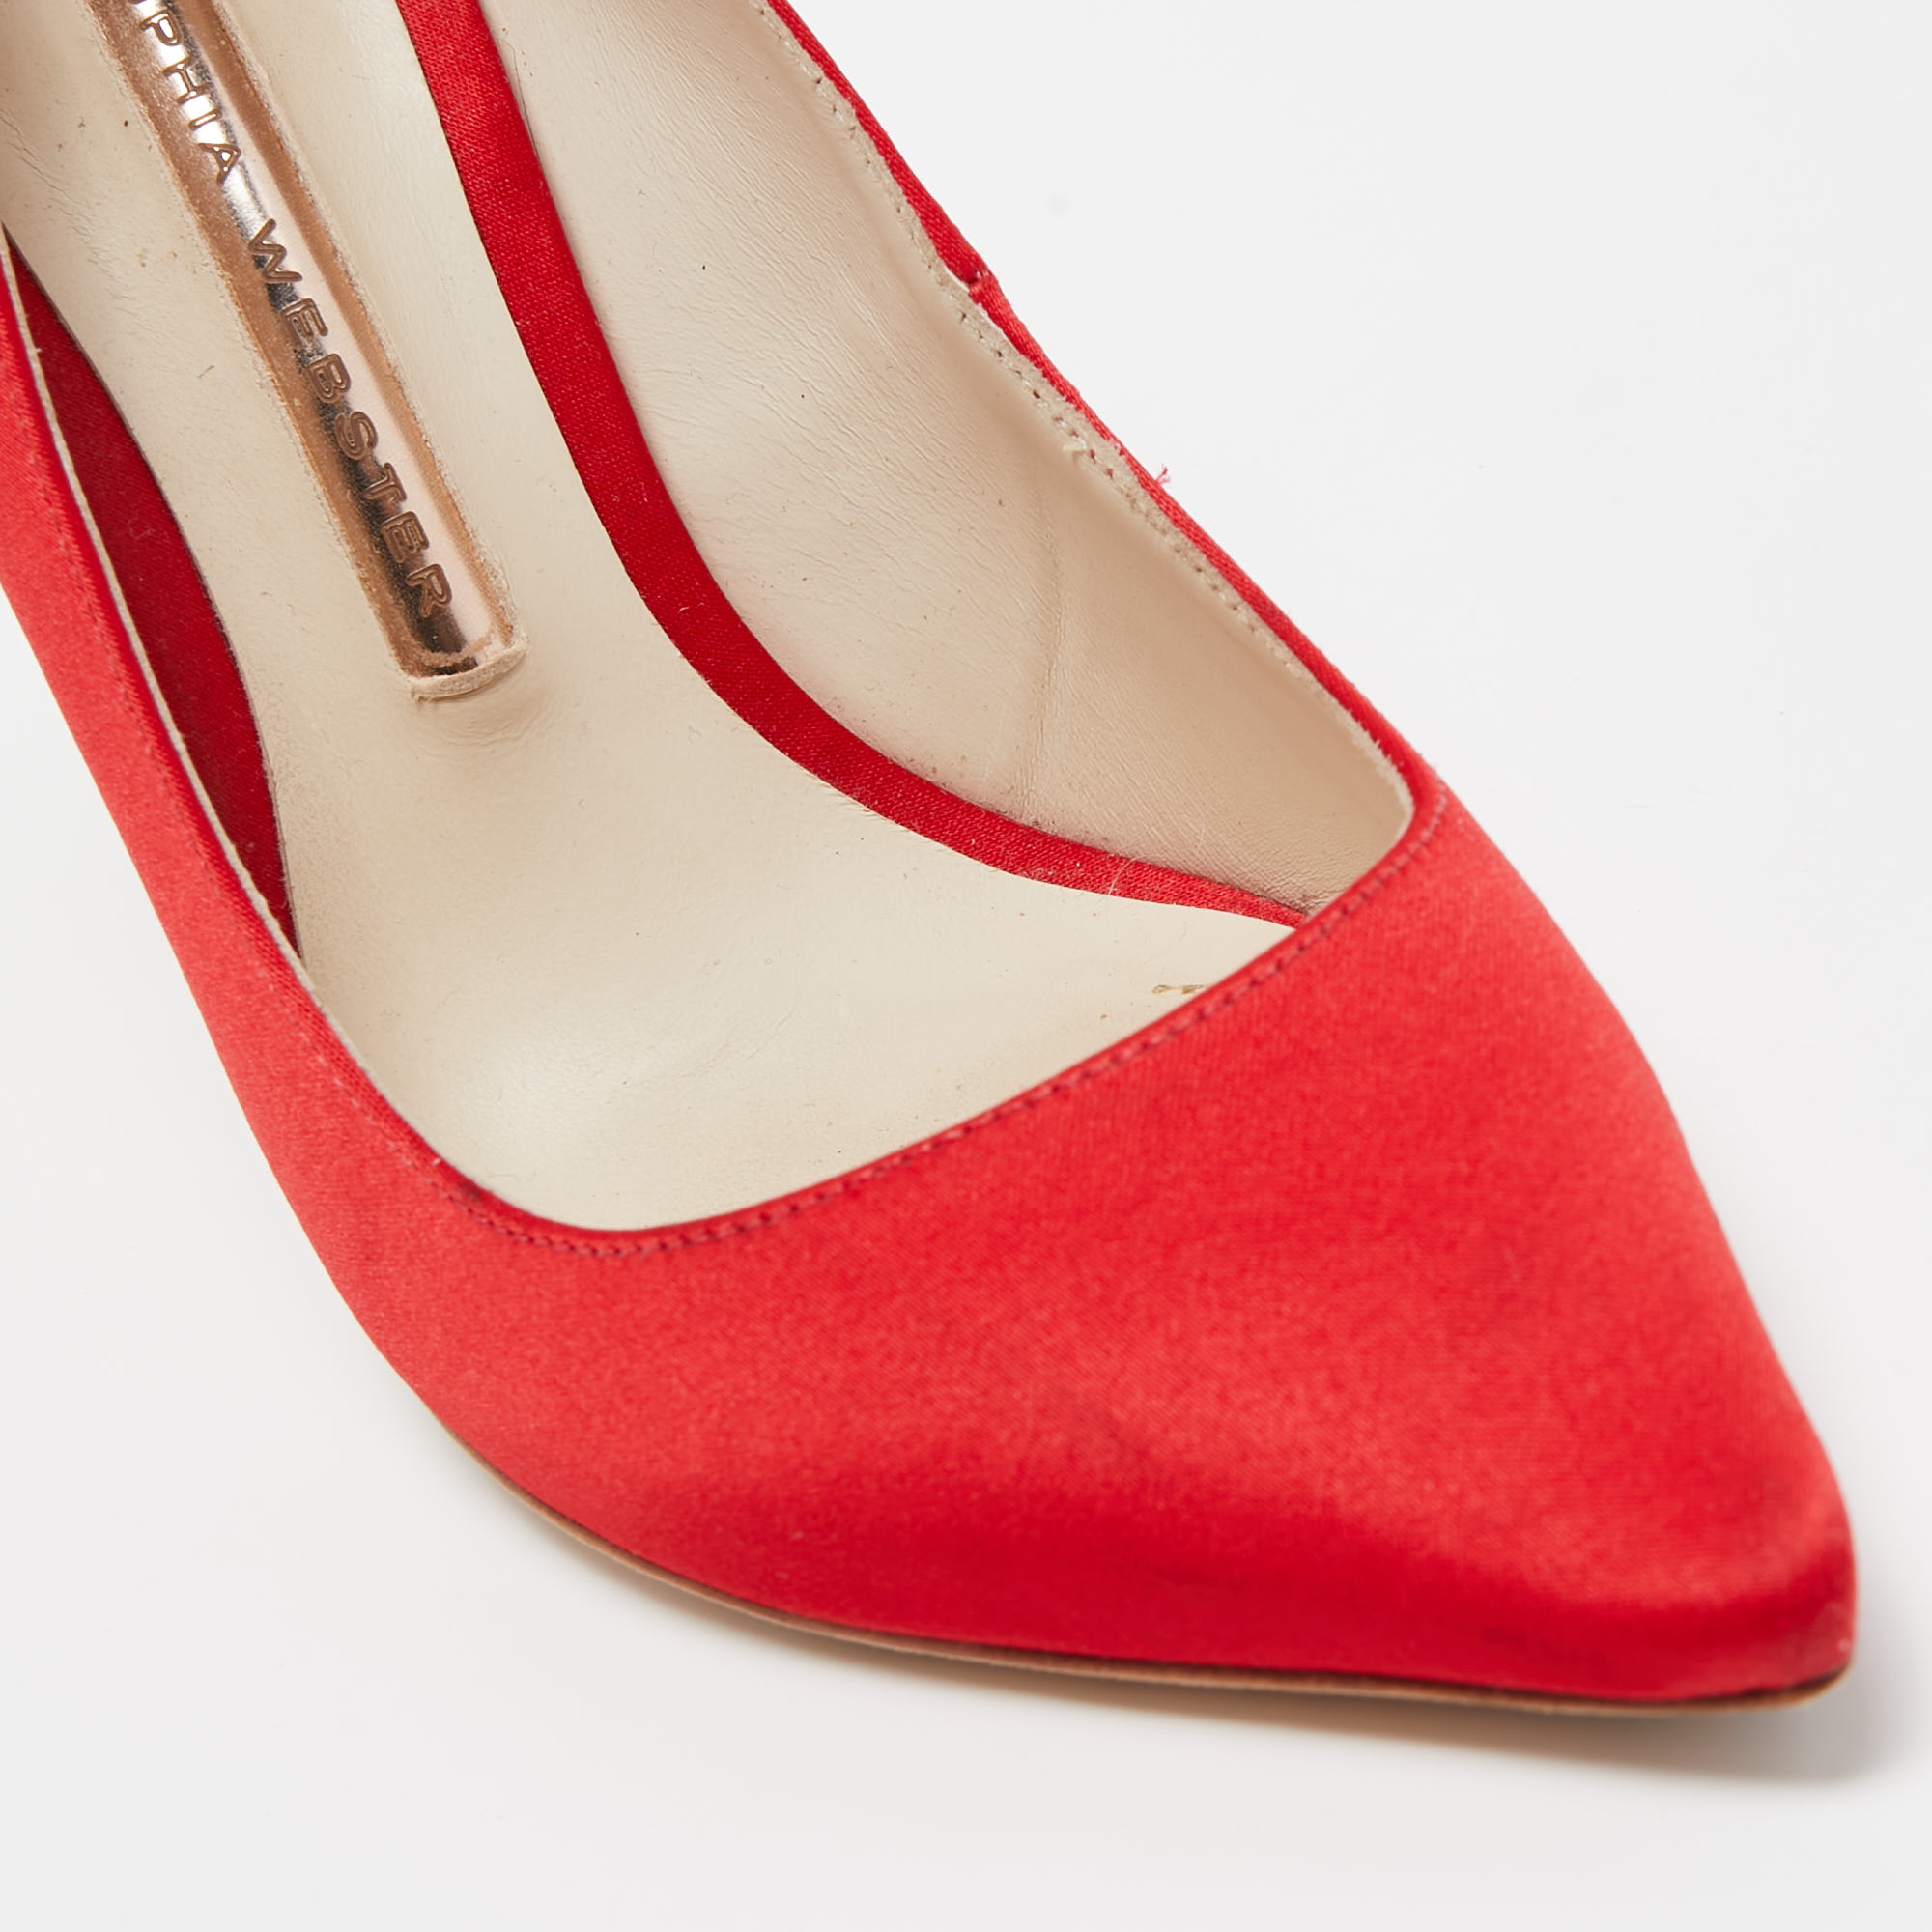 Sophia Webster Red Satin Coco Crystal Pumps Size 36.5